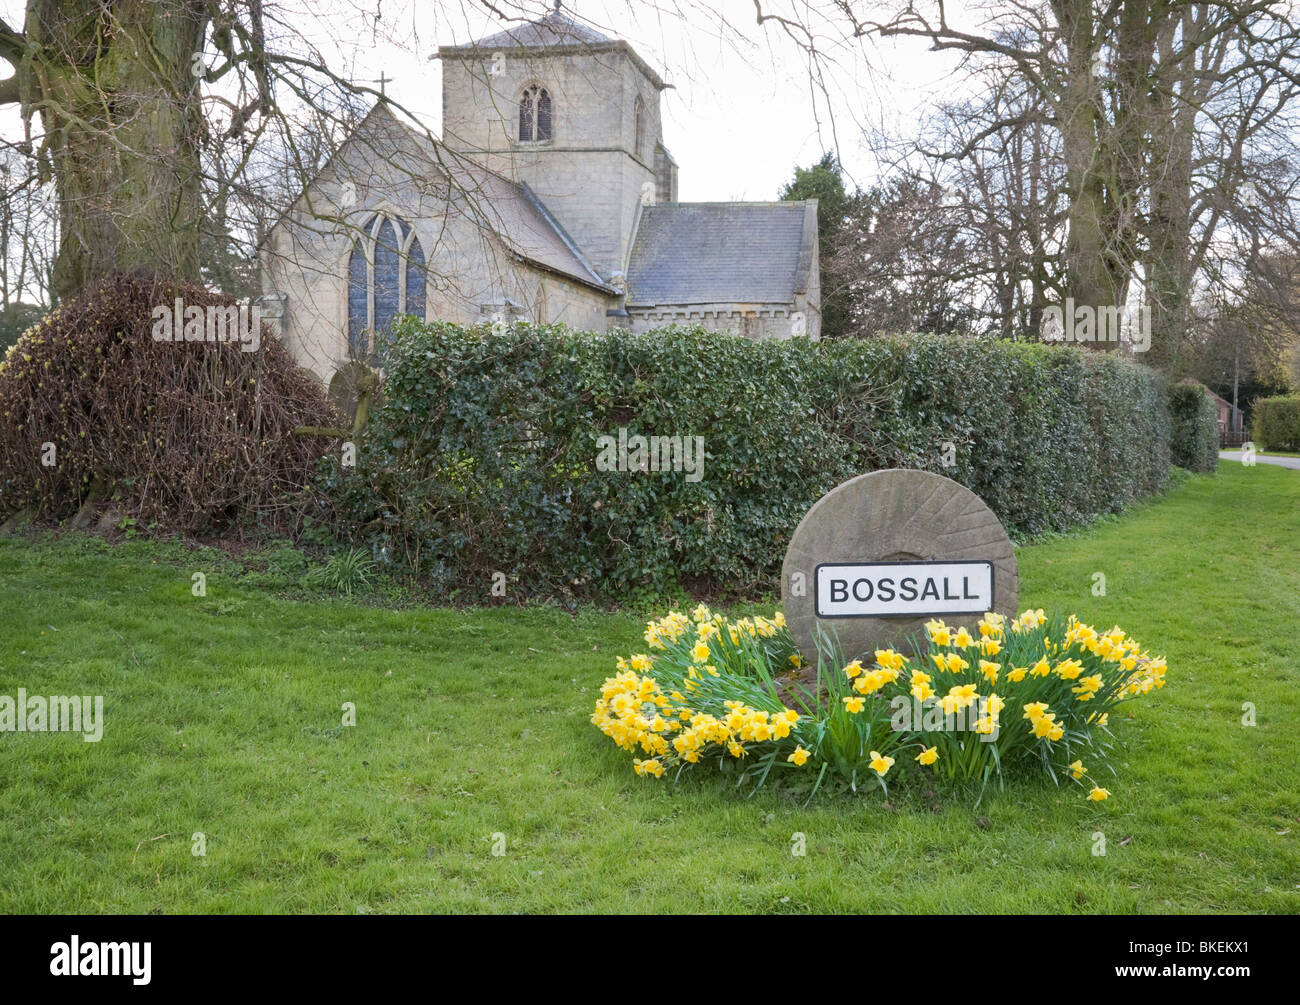 Bossall village sign with church of St. Botolph. Stock Photo